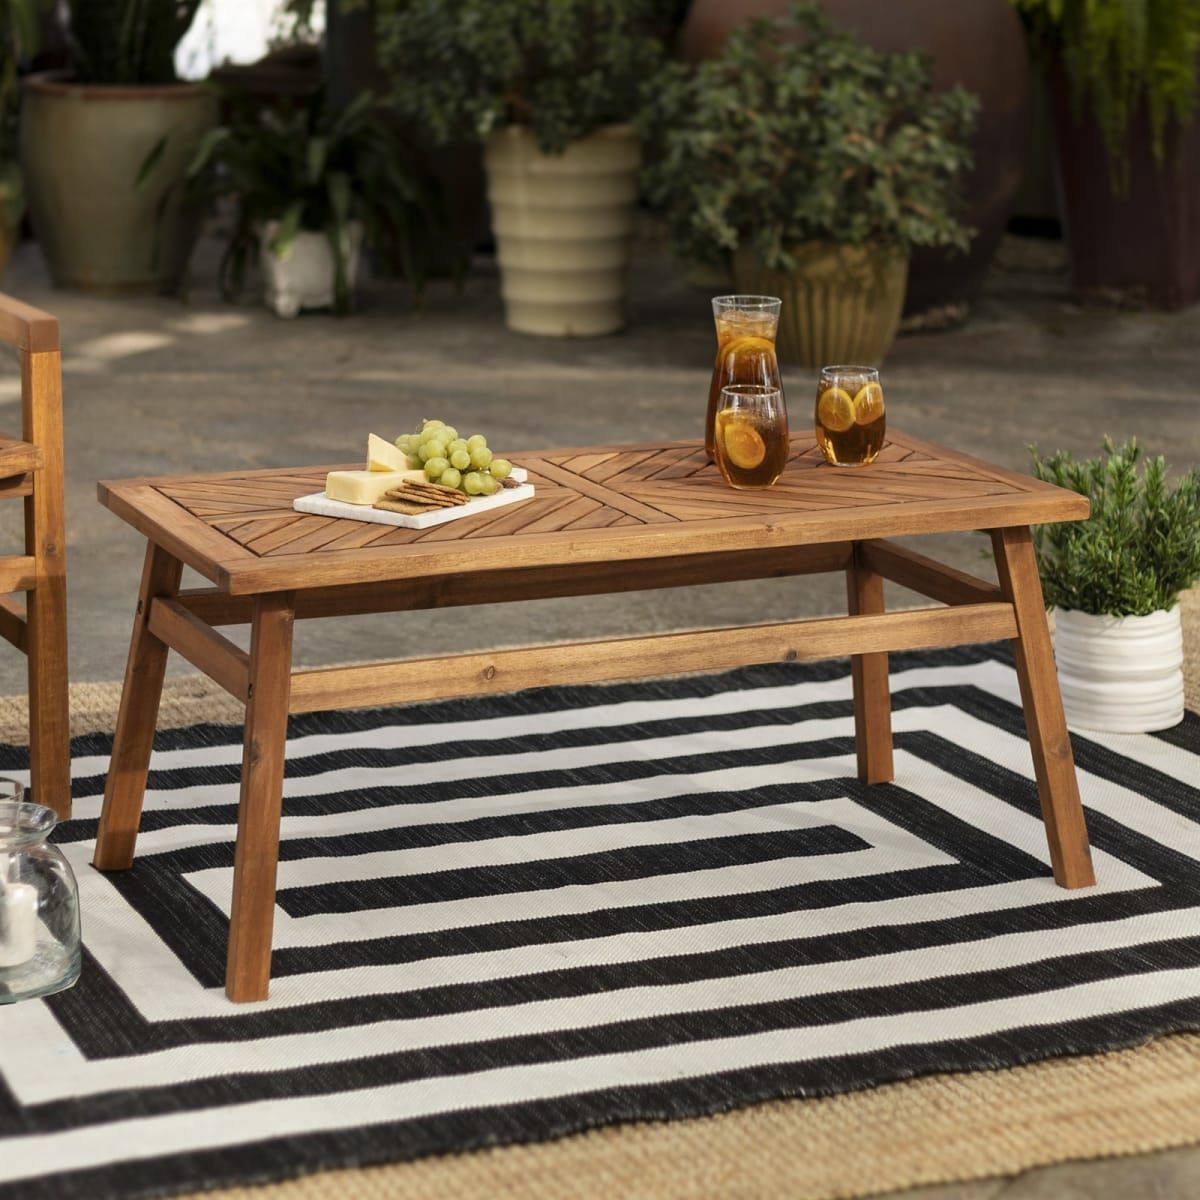 With An Acacia Wood Construction, This Patio Coffee Table Is Perfect Throughout Modern Outdoor Patio Coffee Tables (View 17 of 20)